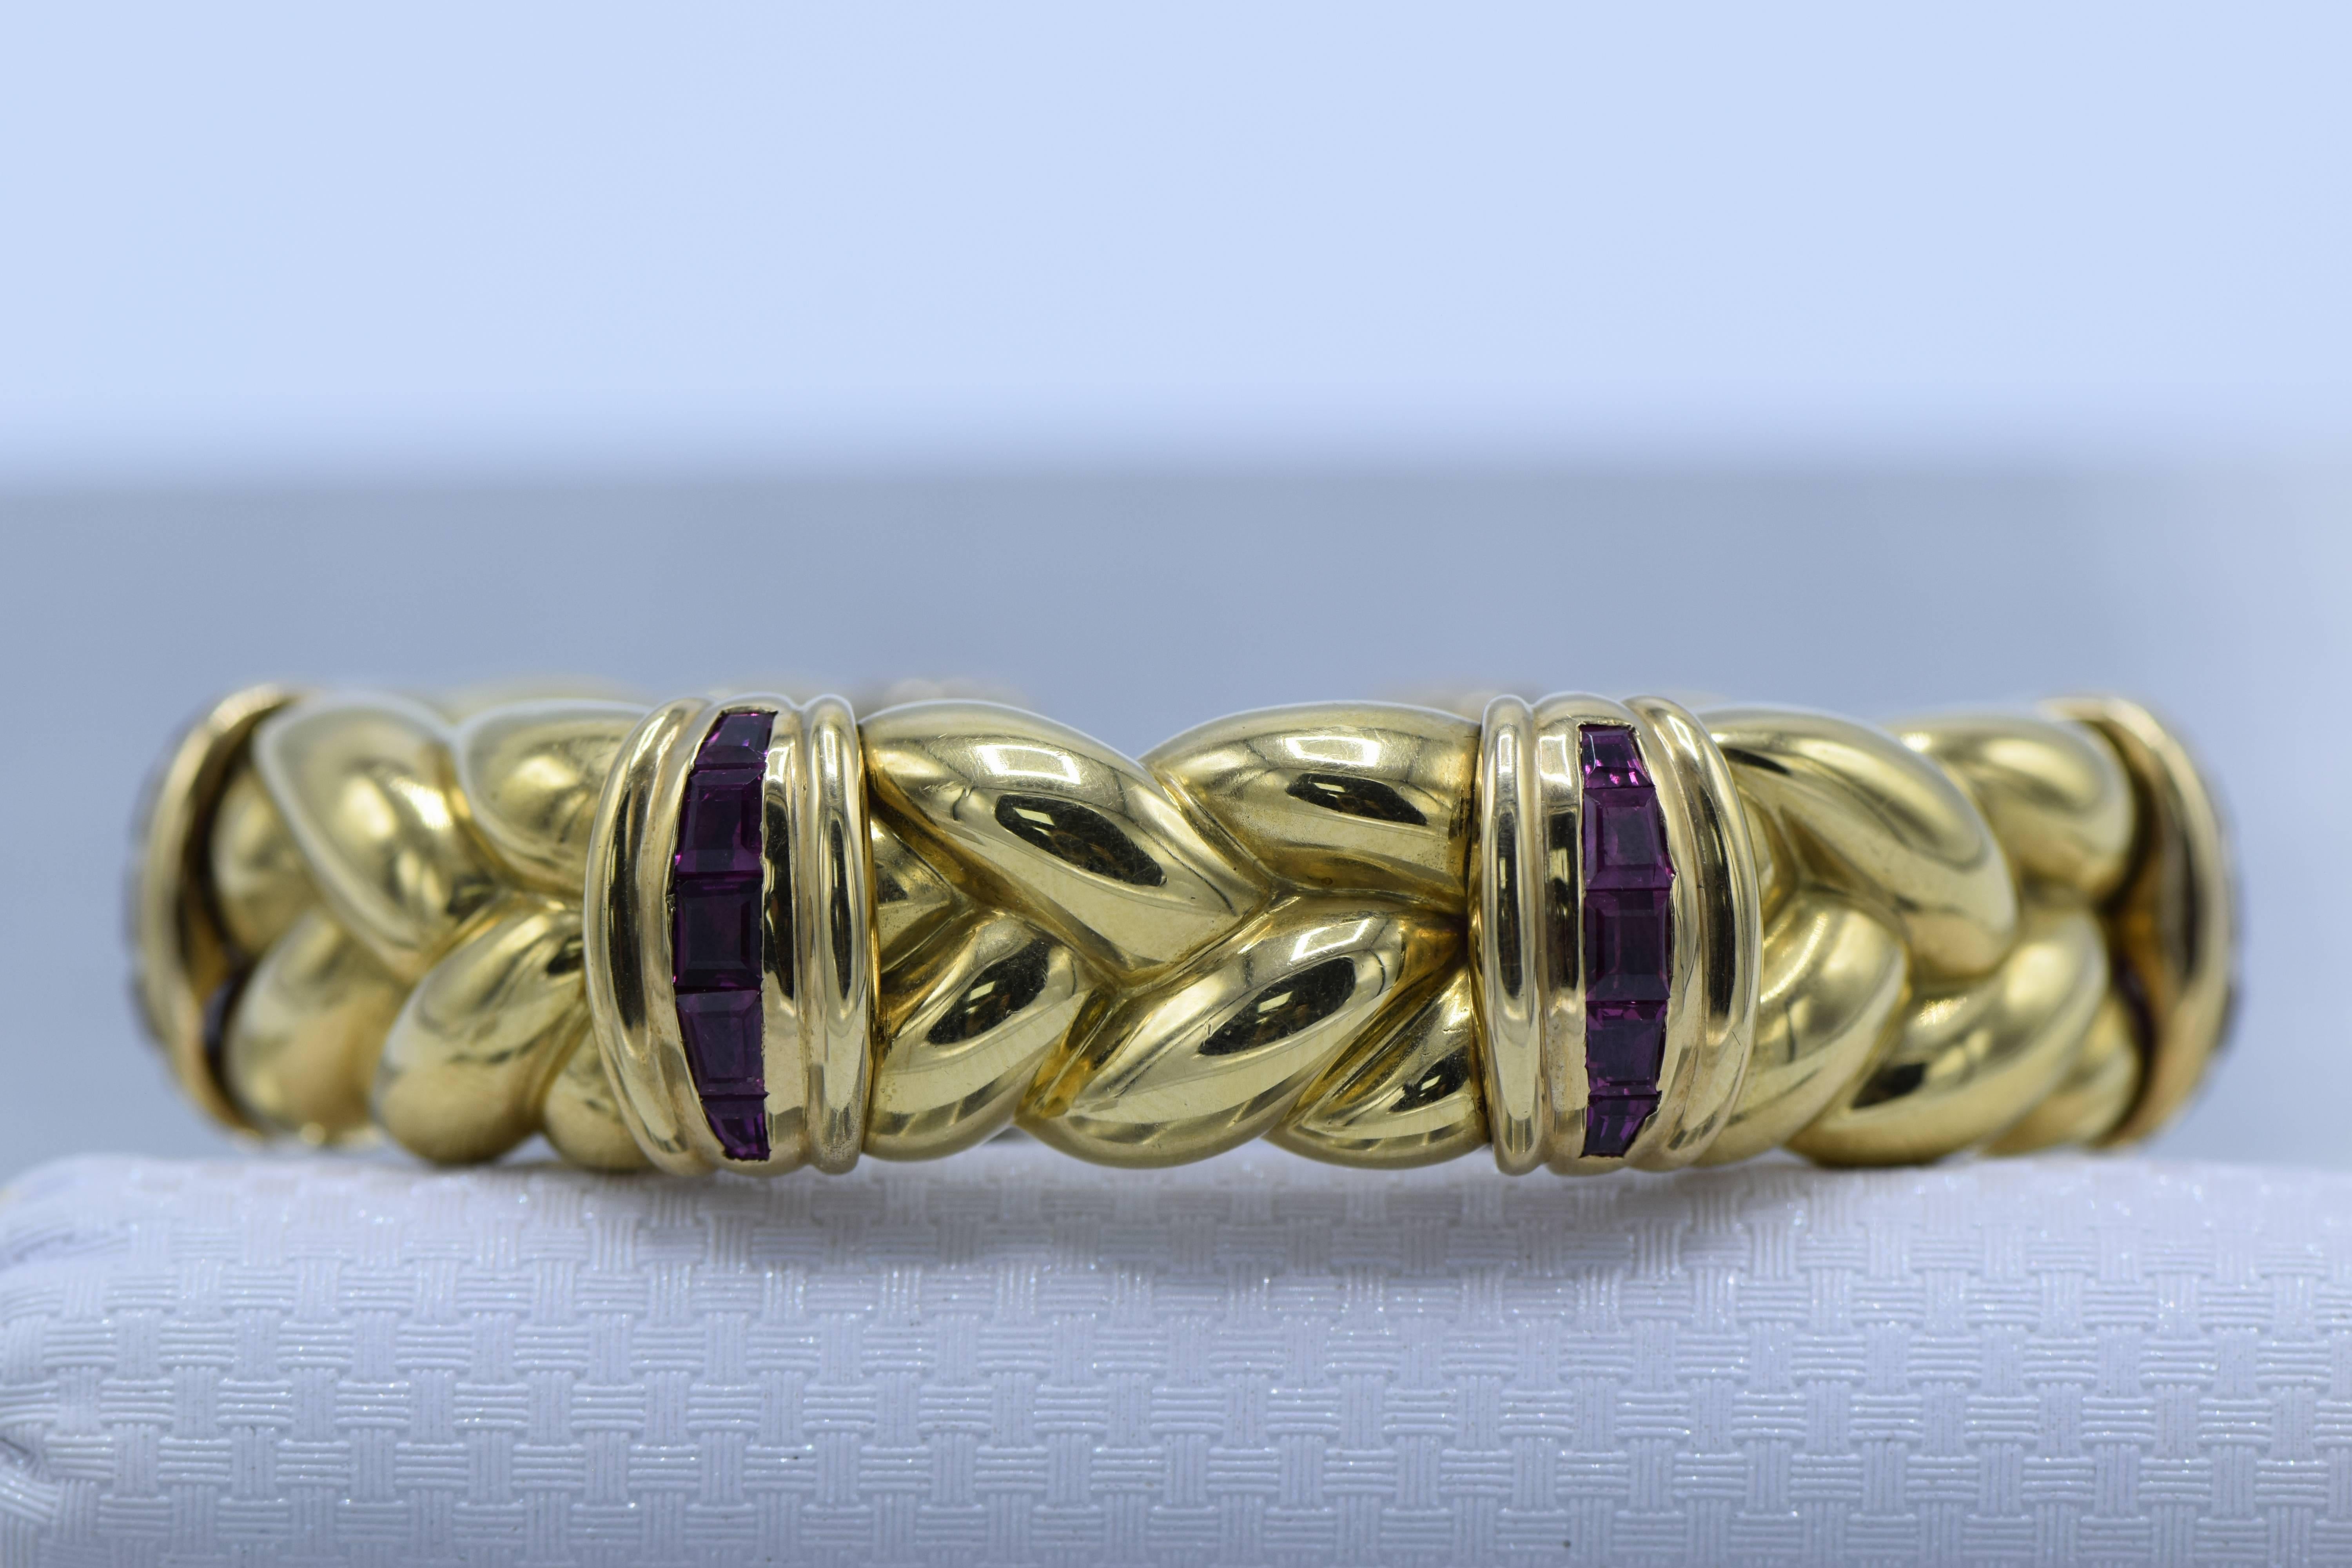 The penannular slightly spring-mounted braid motif with a quartet of fluted stations accented by channels of rubies, in 18k gold, inner circumference 6 1/8 inches

Dimensions: 16 mm 

Rubies: medium dark pinkish red